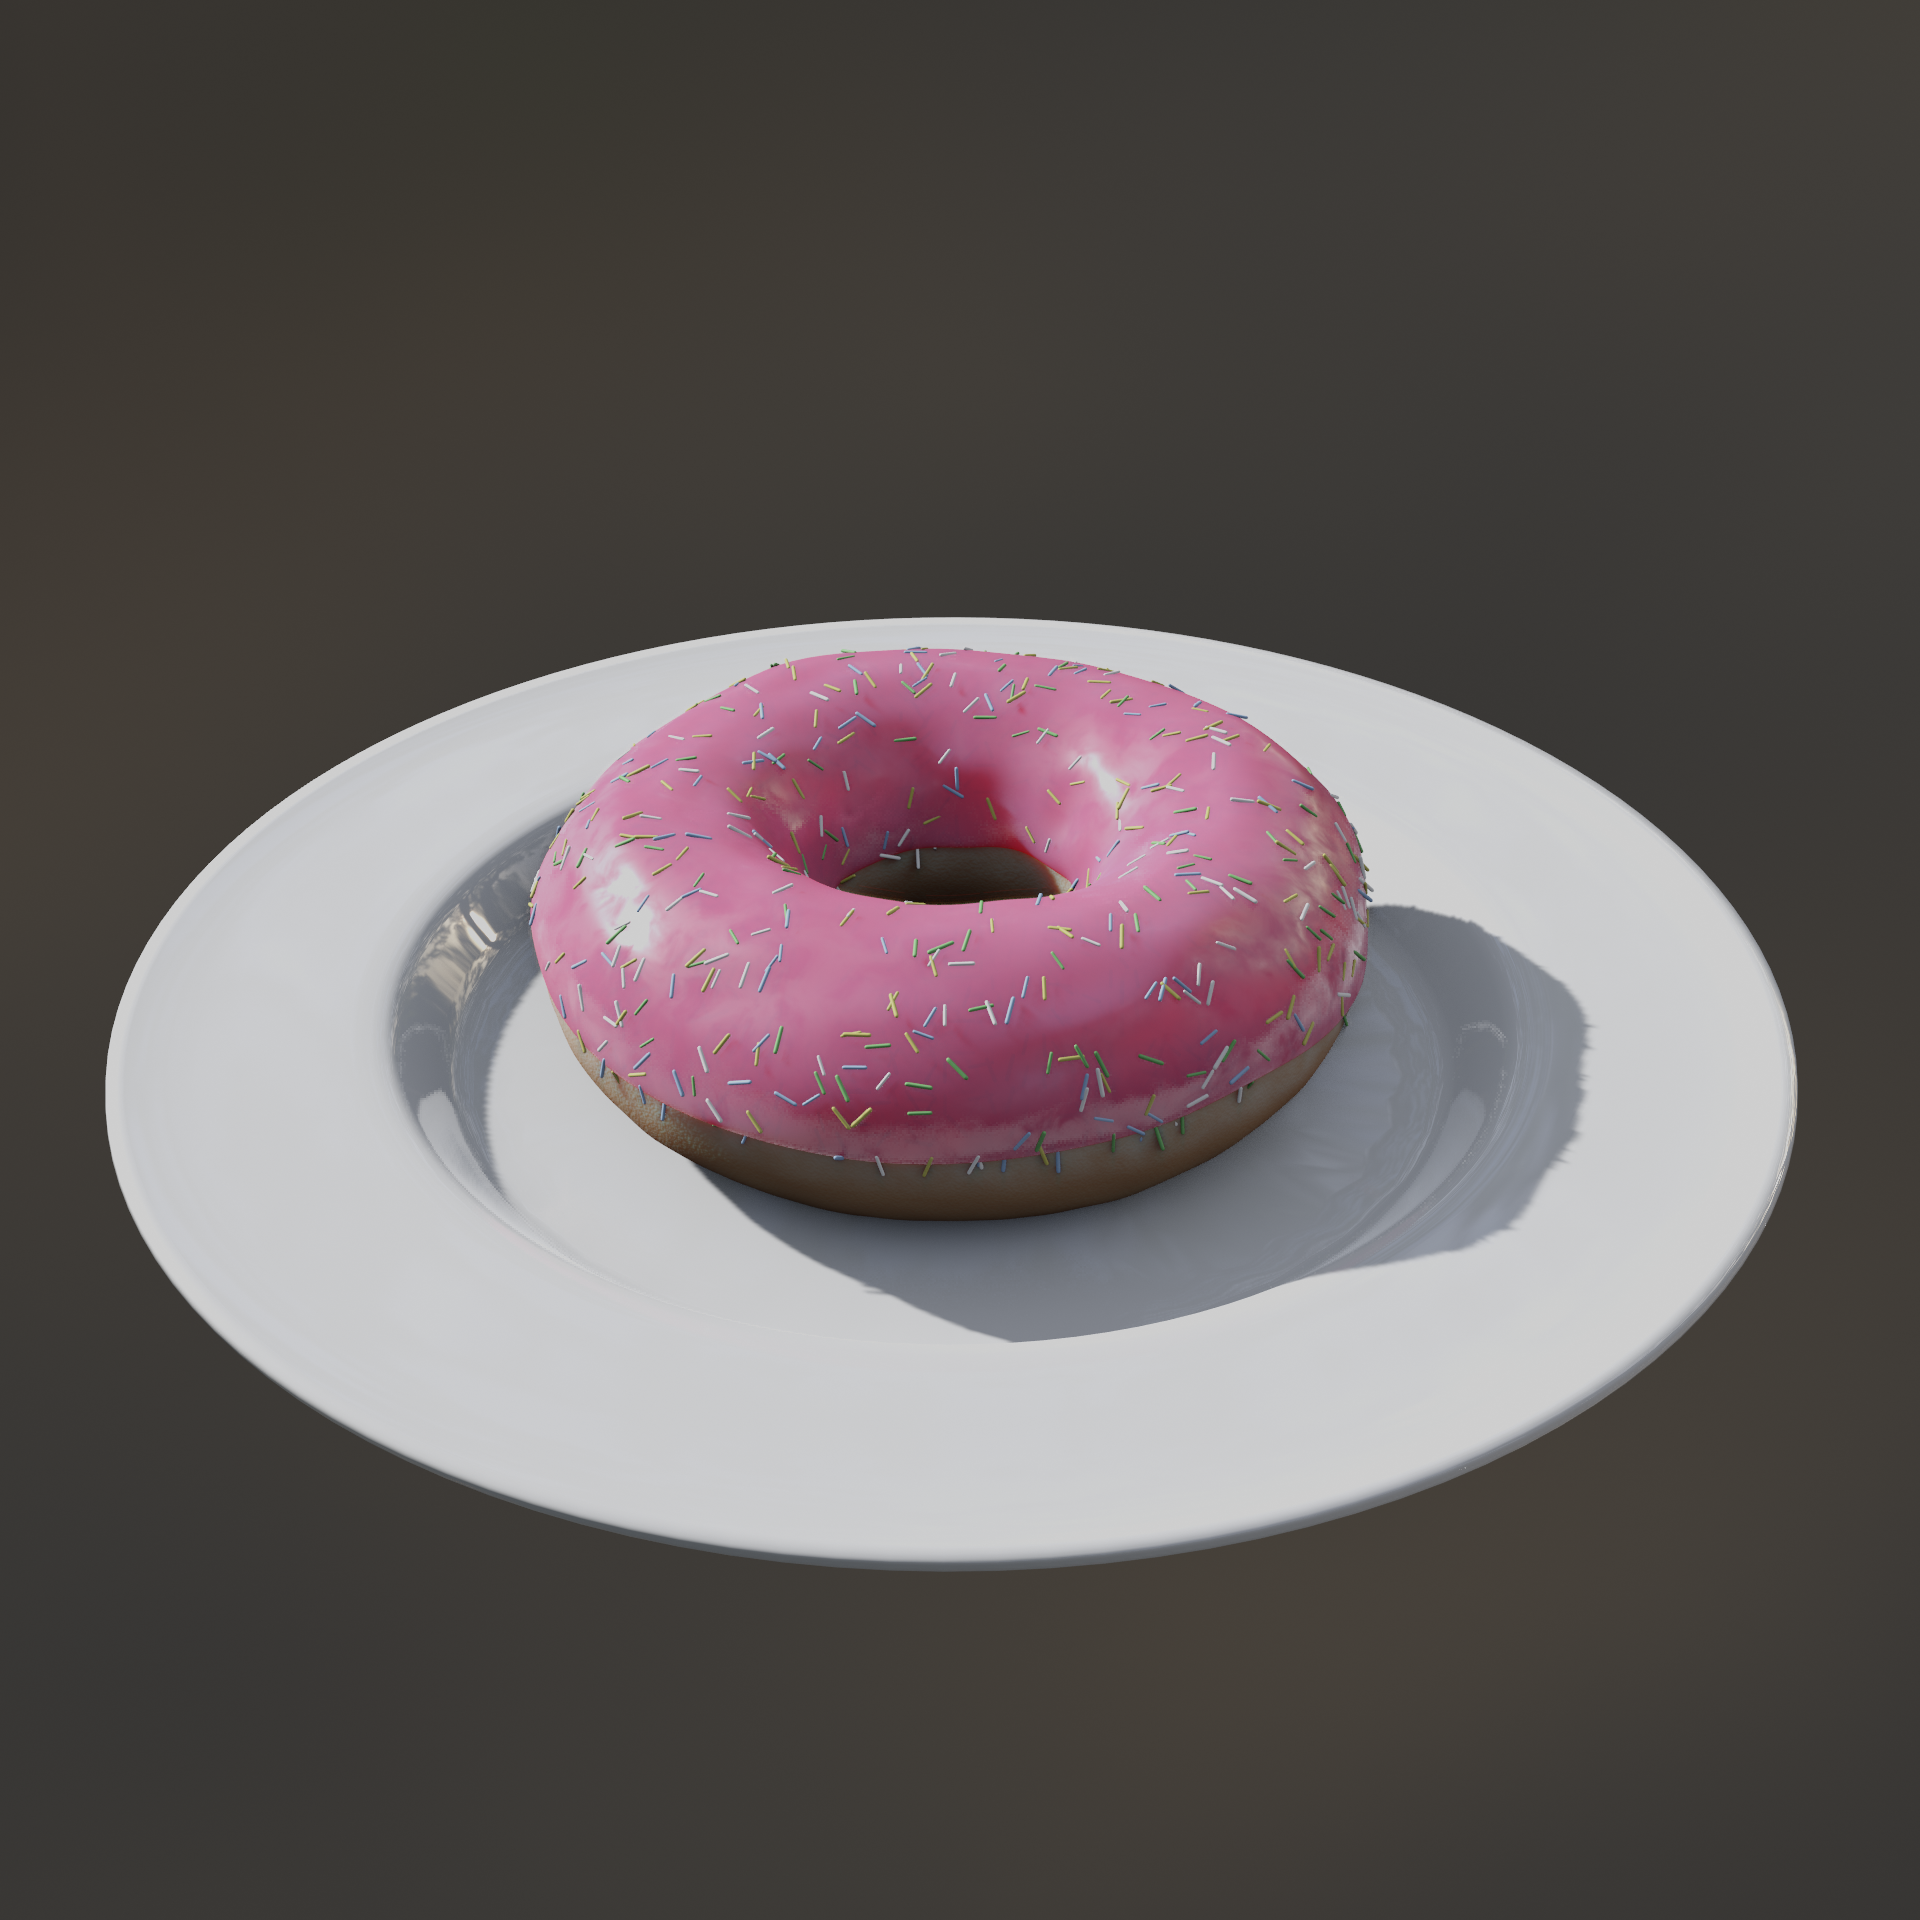 nondestructive donut preview image 6